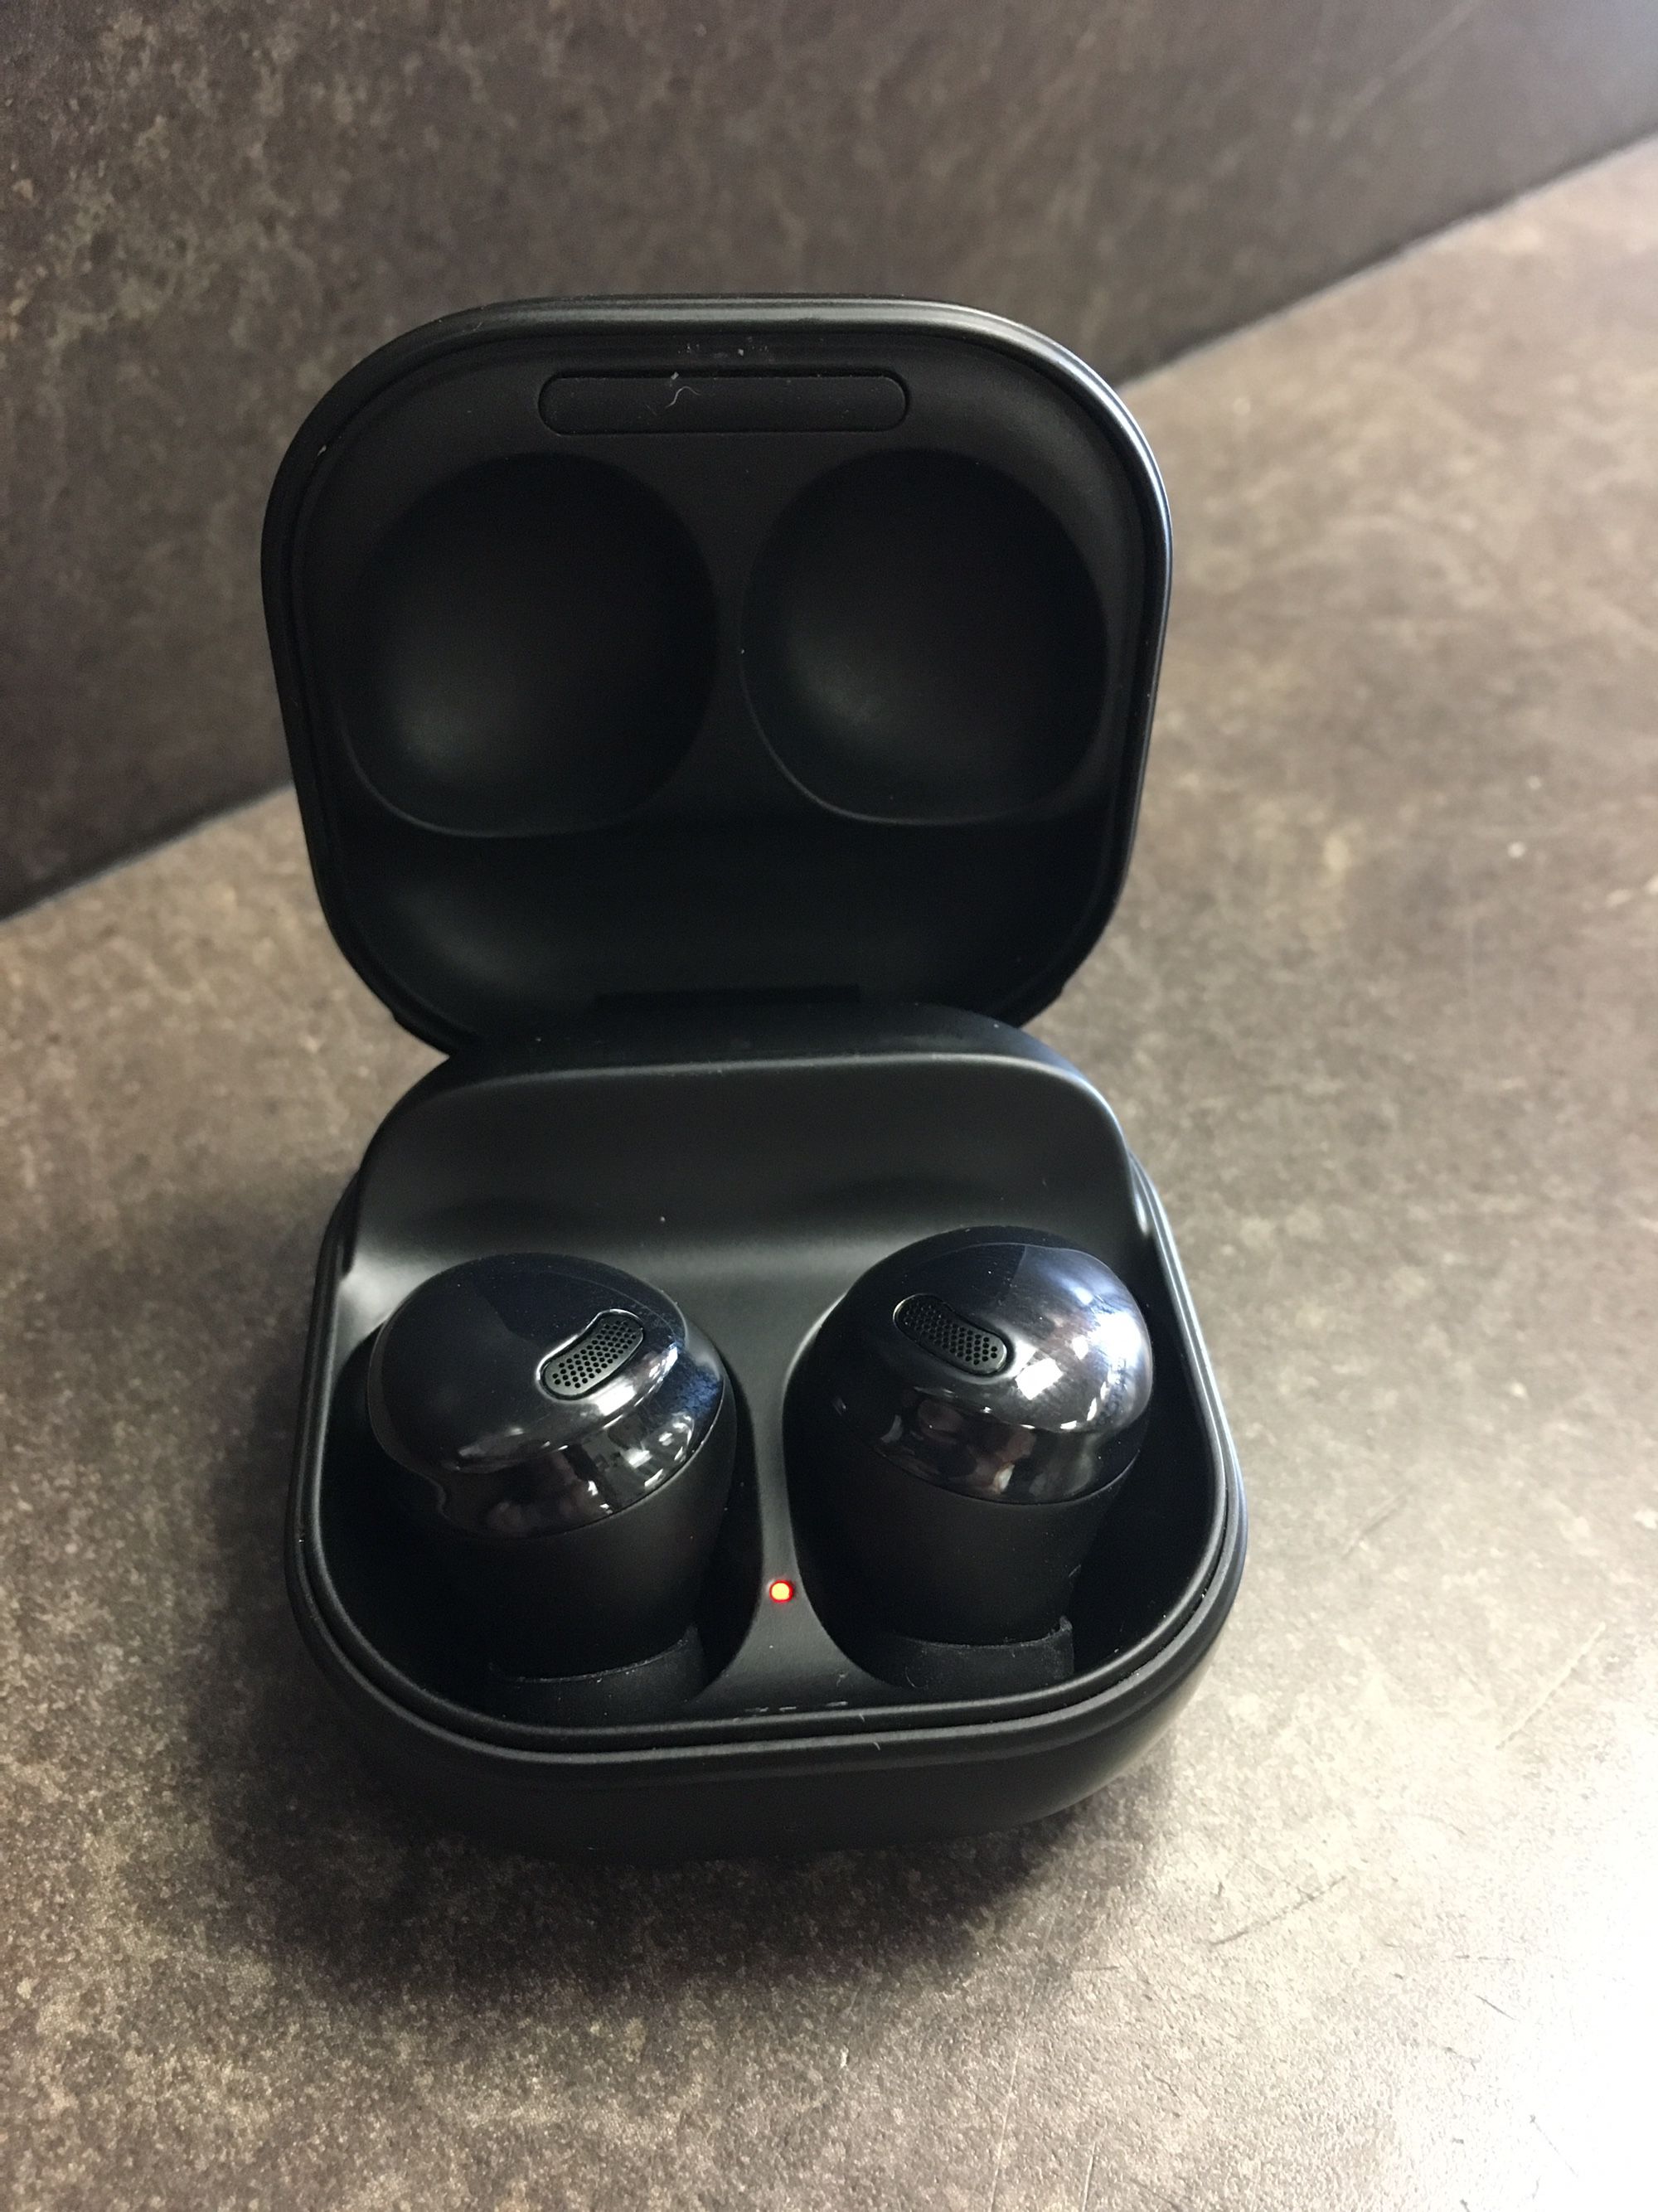 SAMSUNG GALAXY PRO WIRELESS EARBUDS WITH CHARGING CASE